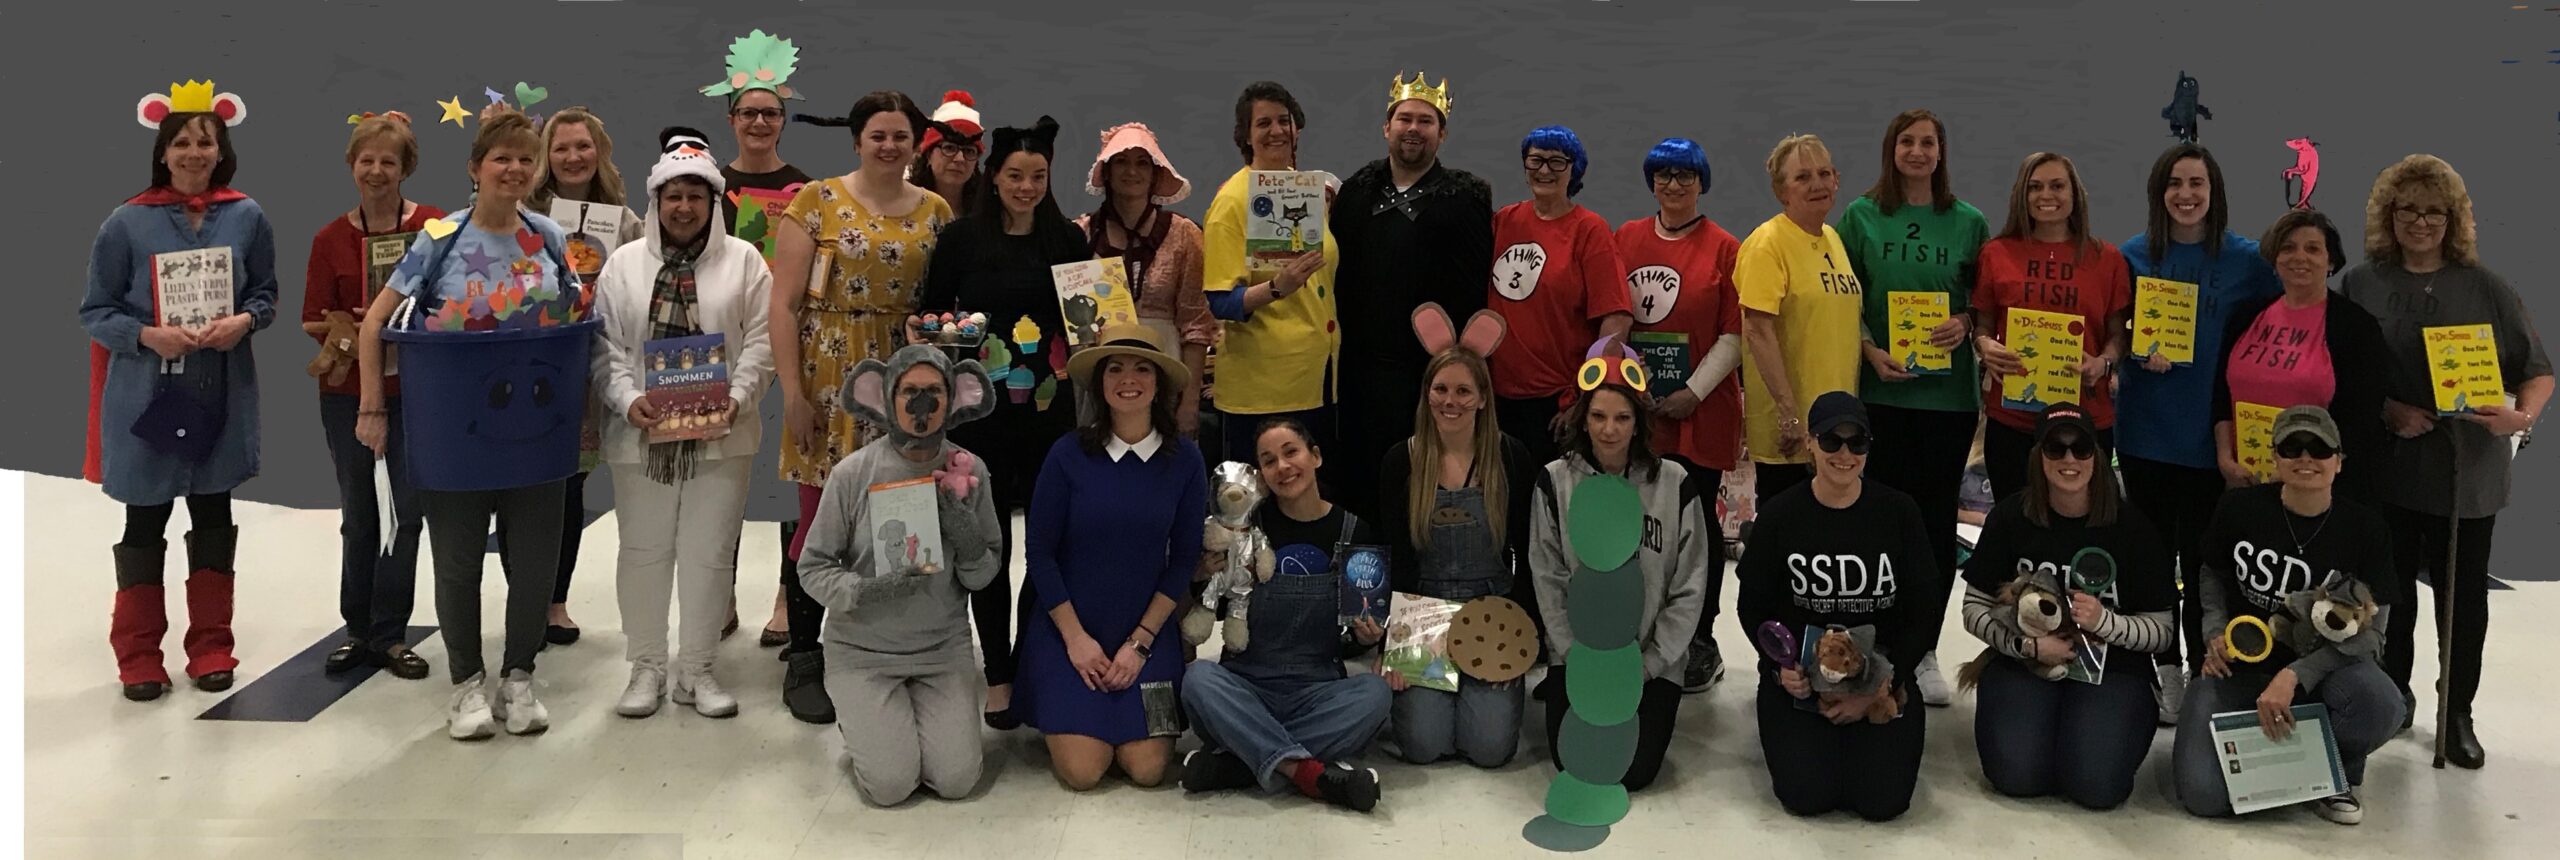 The teachers also chose a book and dressed up for Character Dress up Day